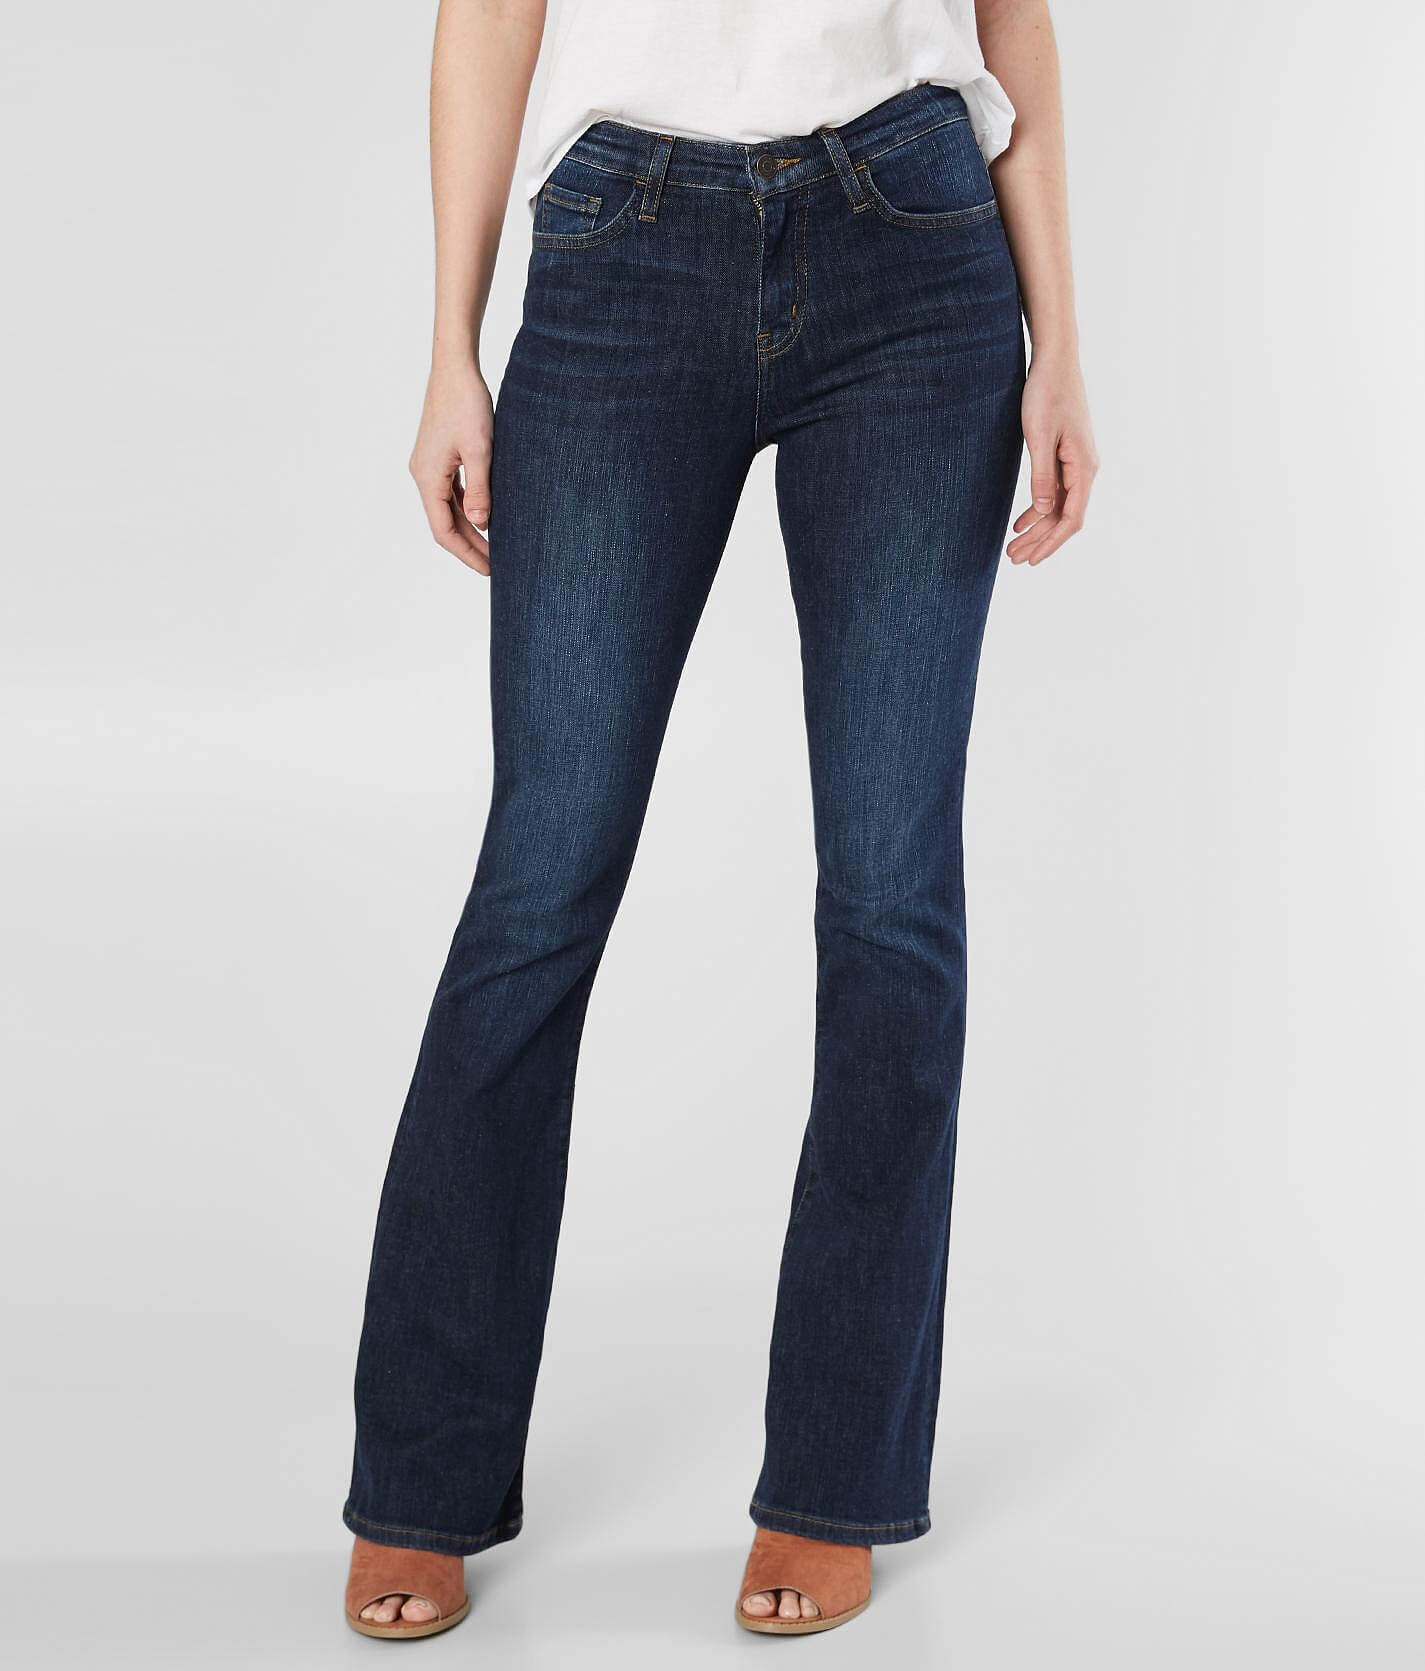 low rise jeans womens uk